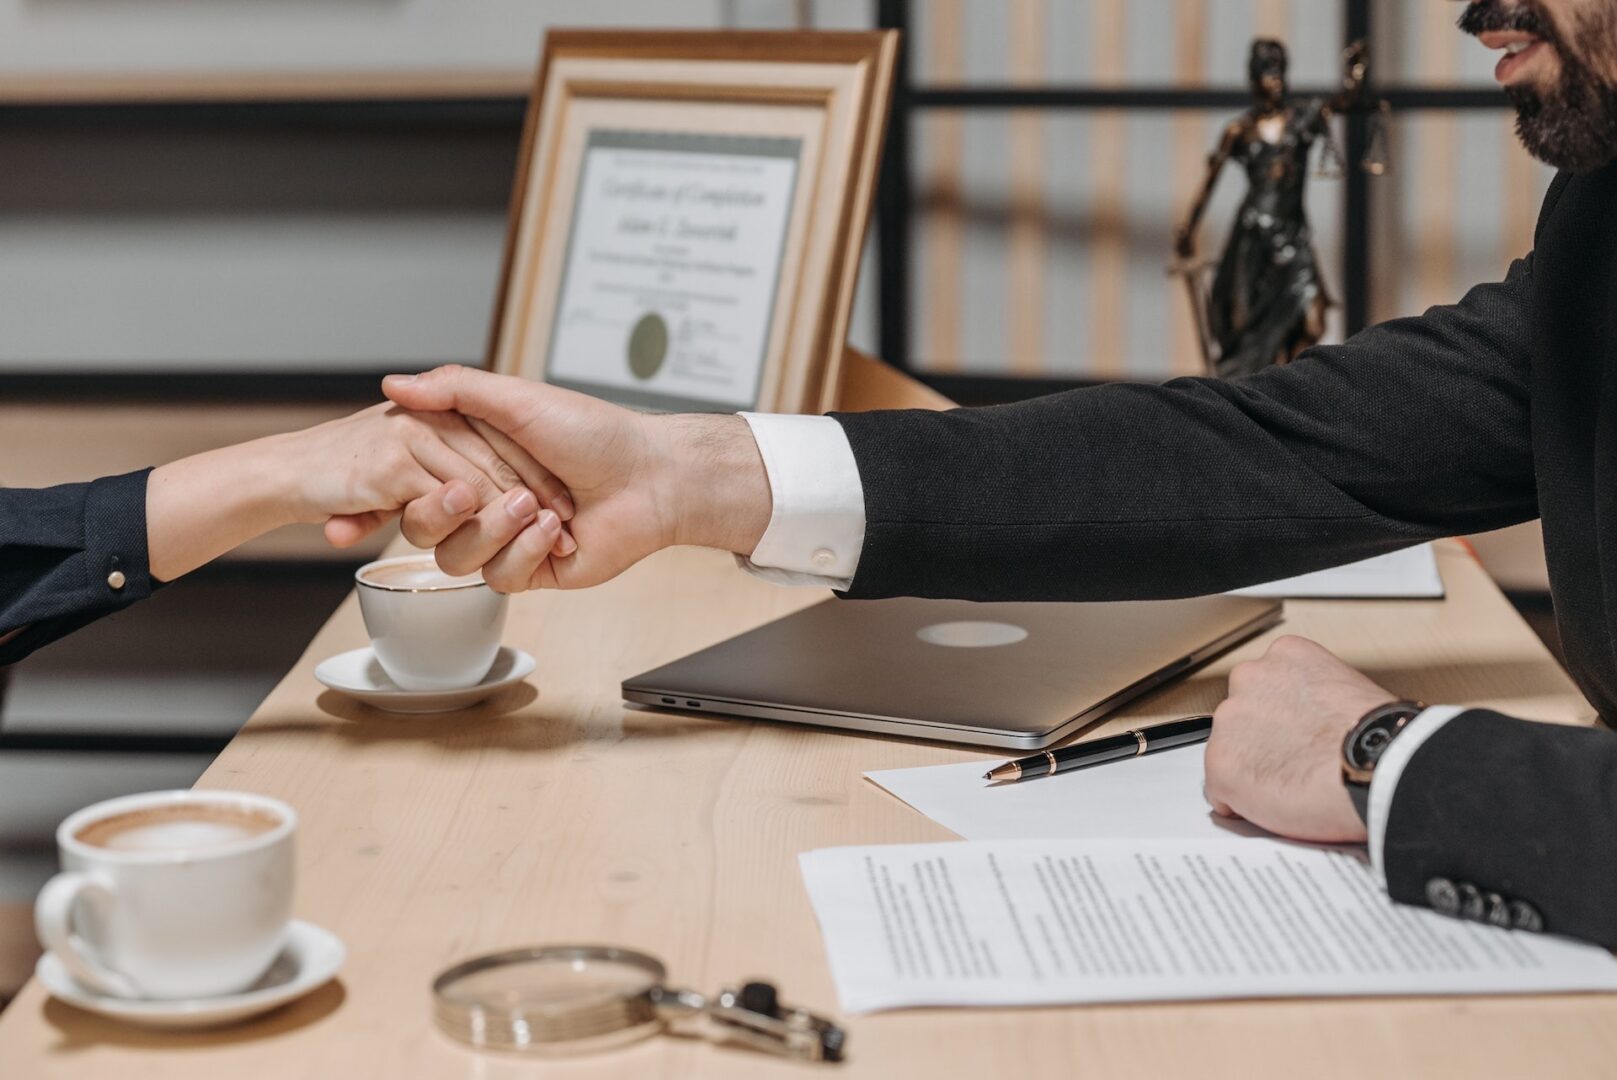 Two people shaking hands over a table with papers and coffee.